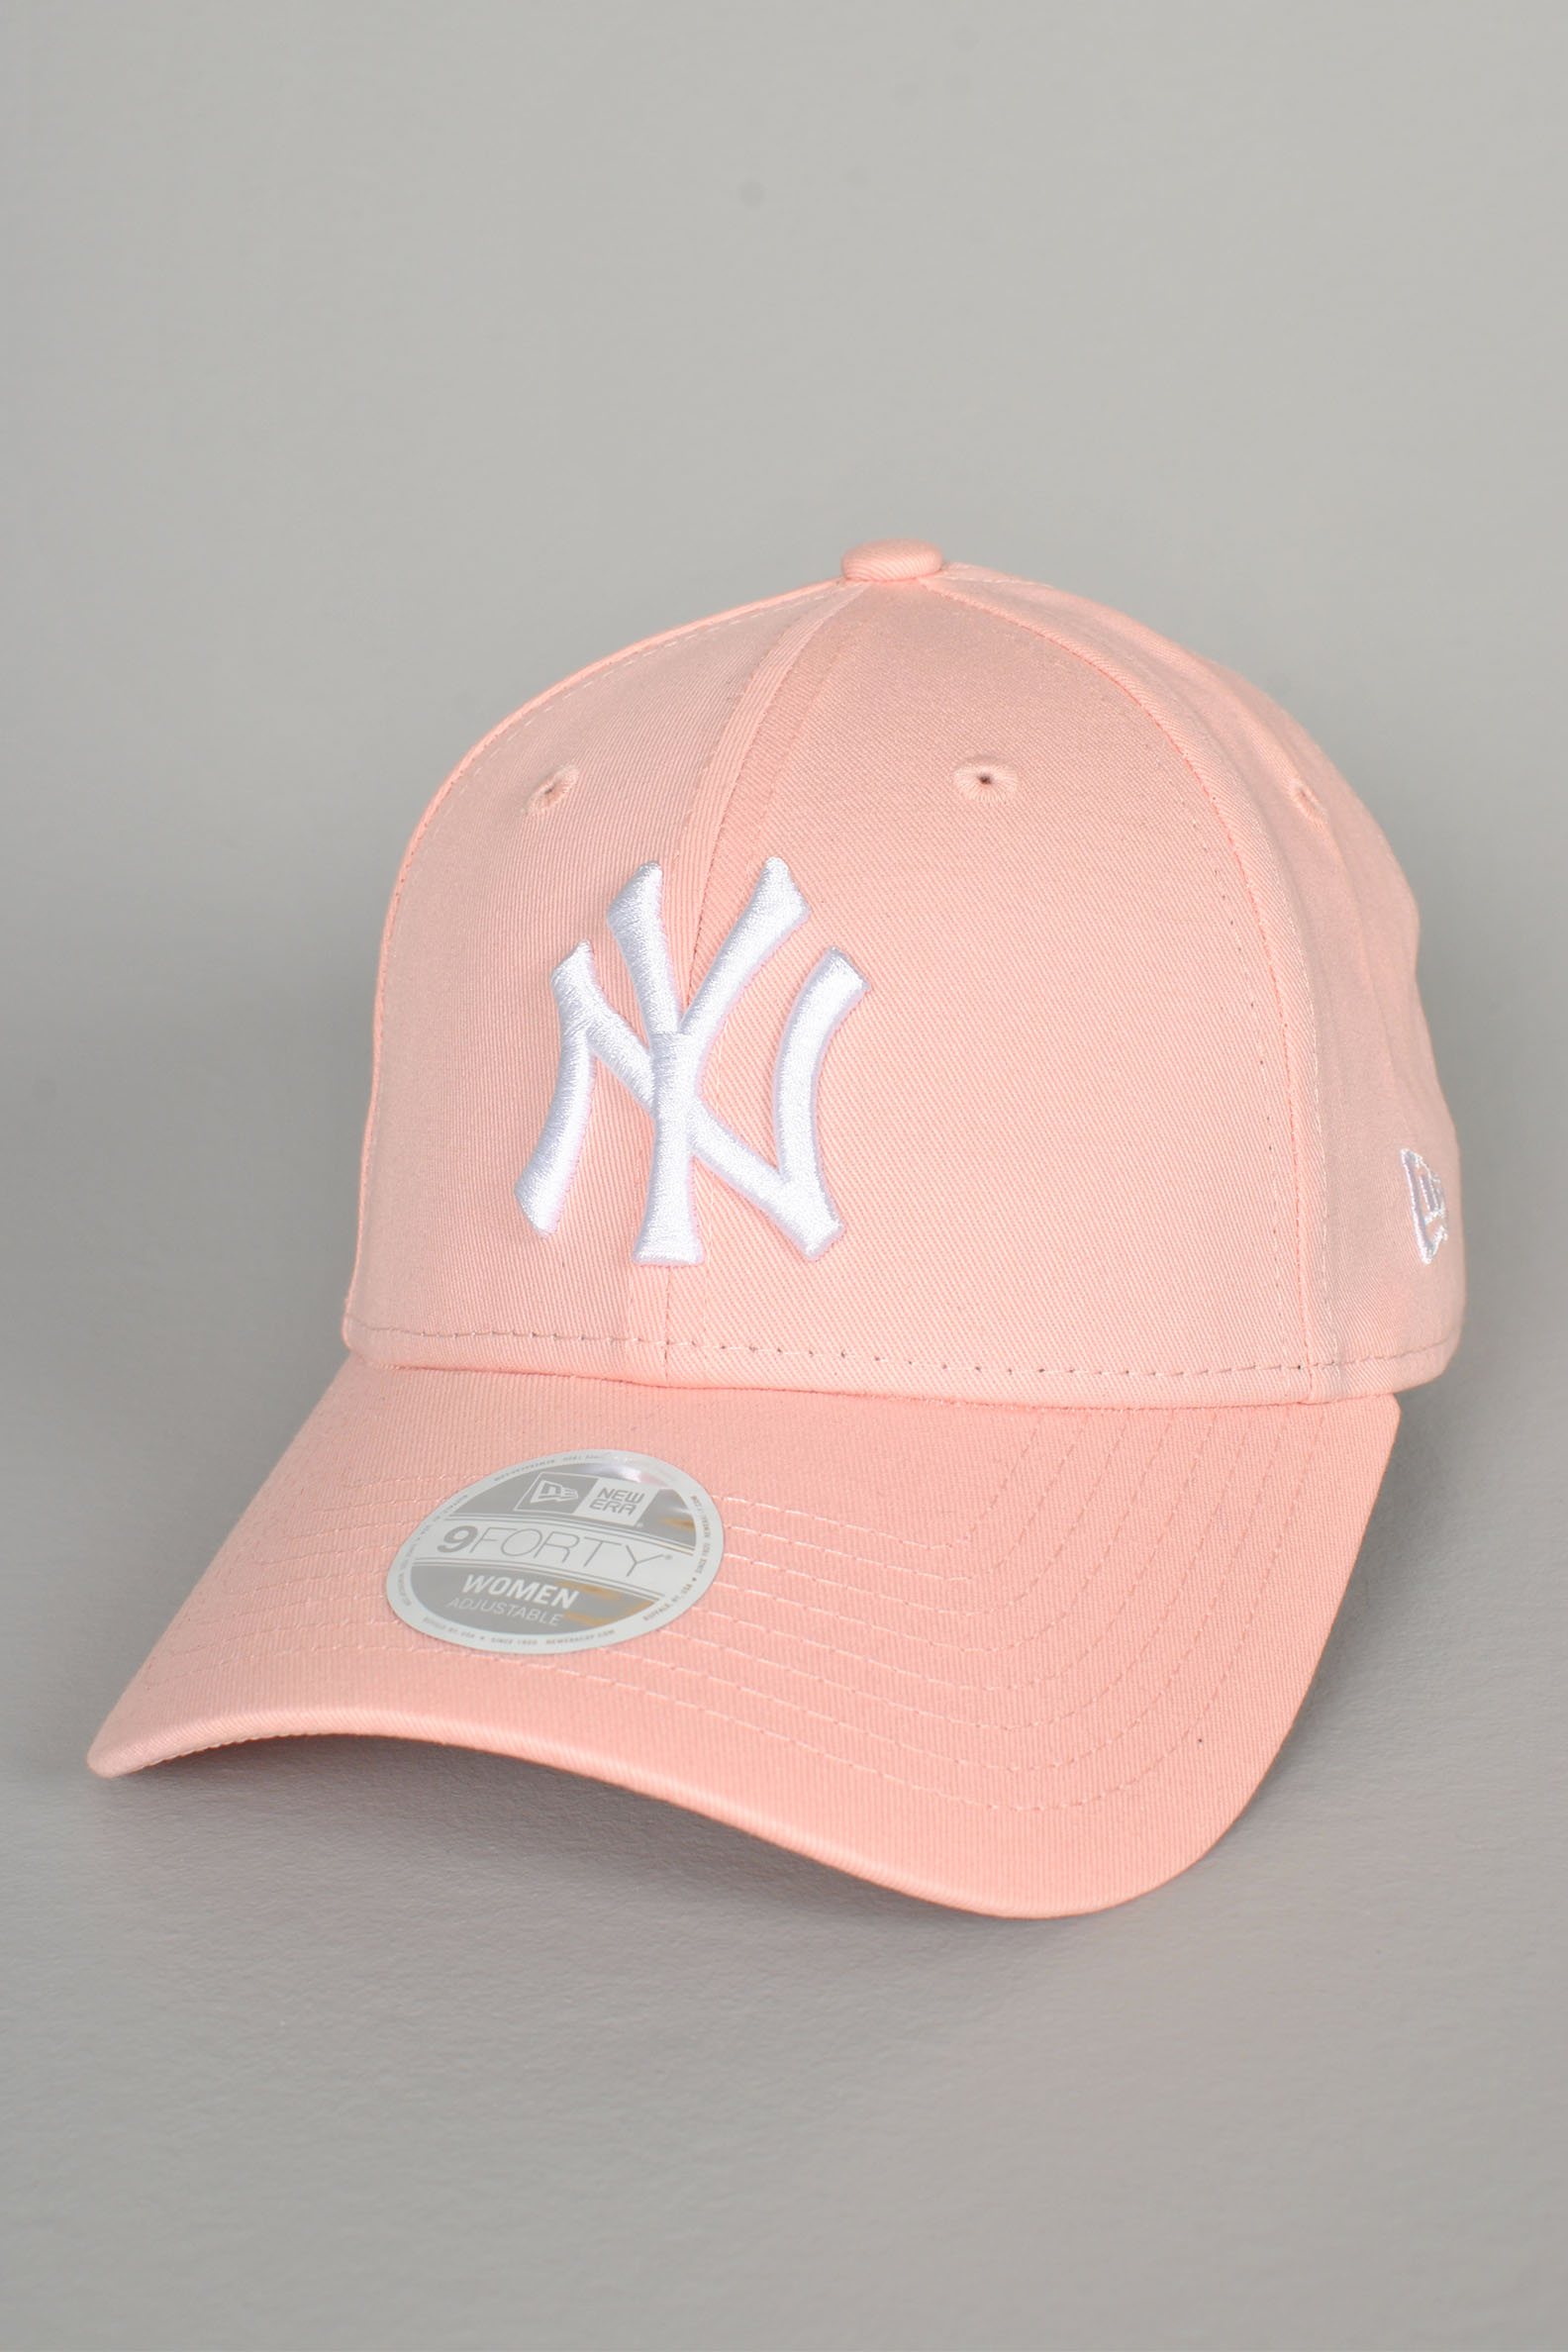 MLB NY Yankees League Essential 9Forty Adjustable Cap